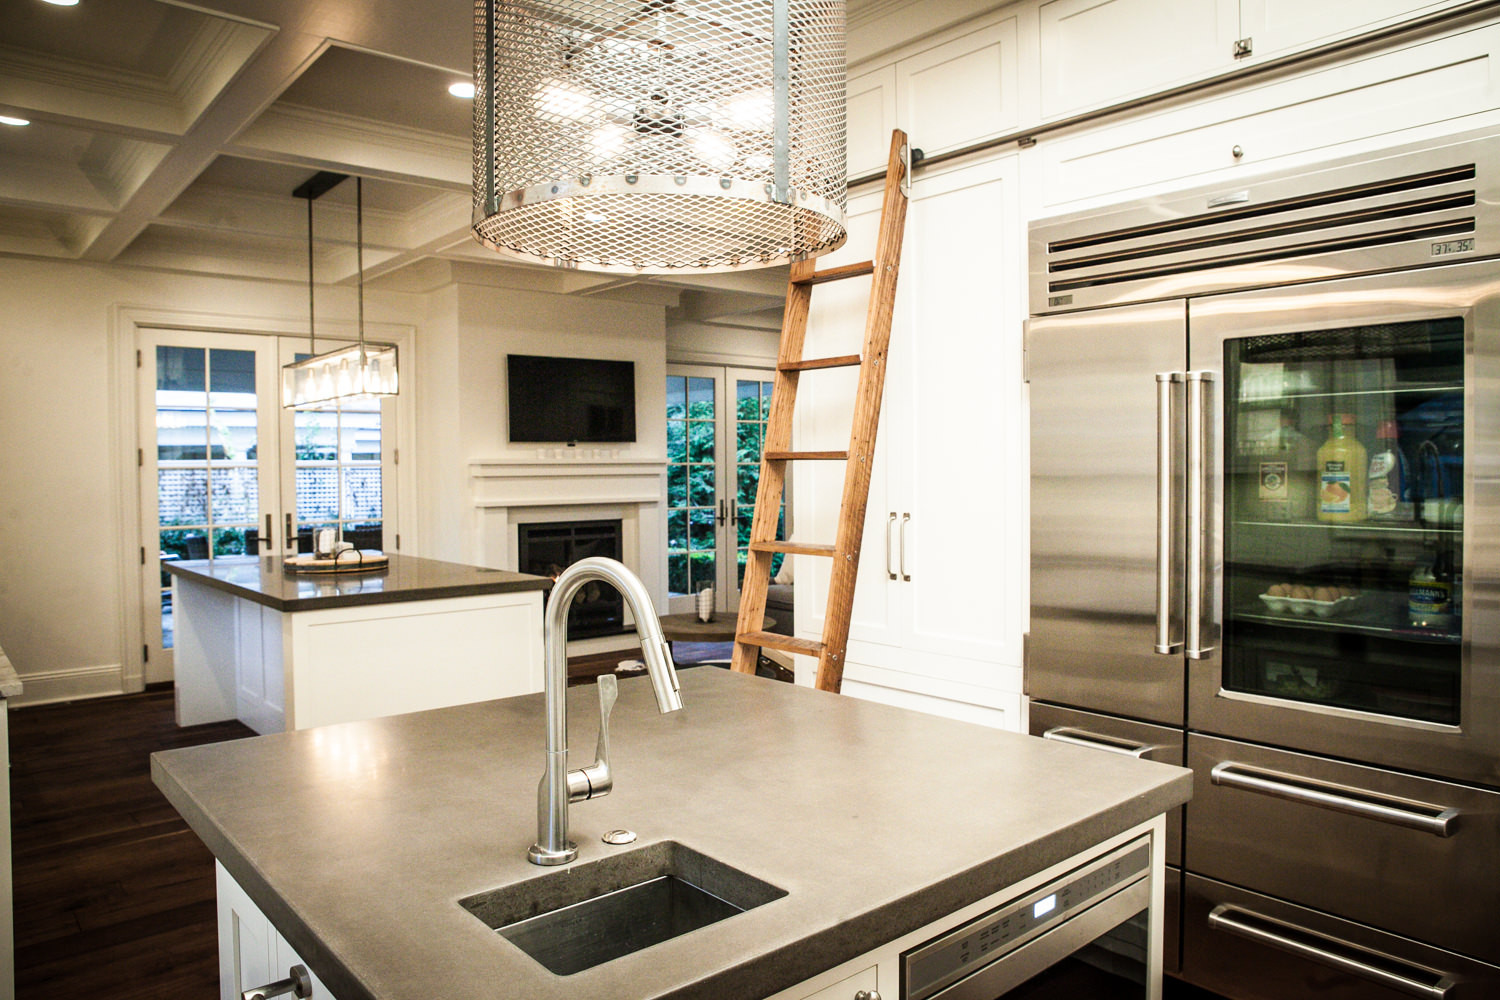 Custom cabinetry by Michael Lucci